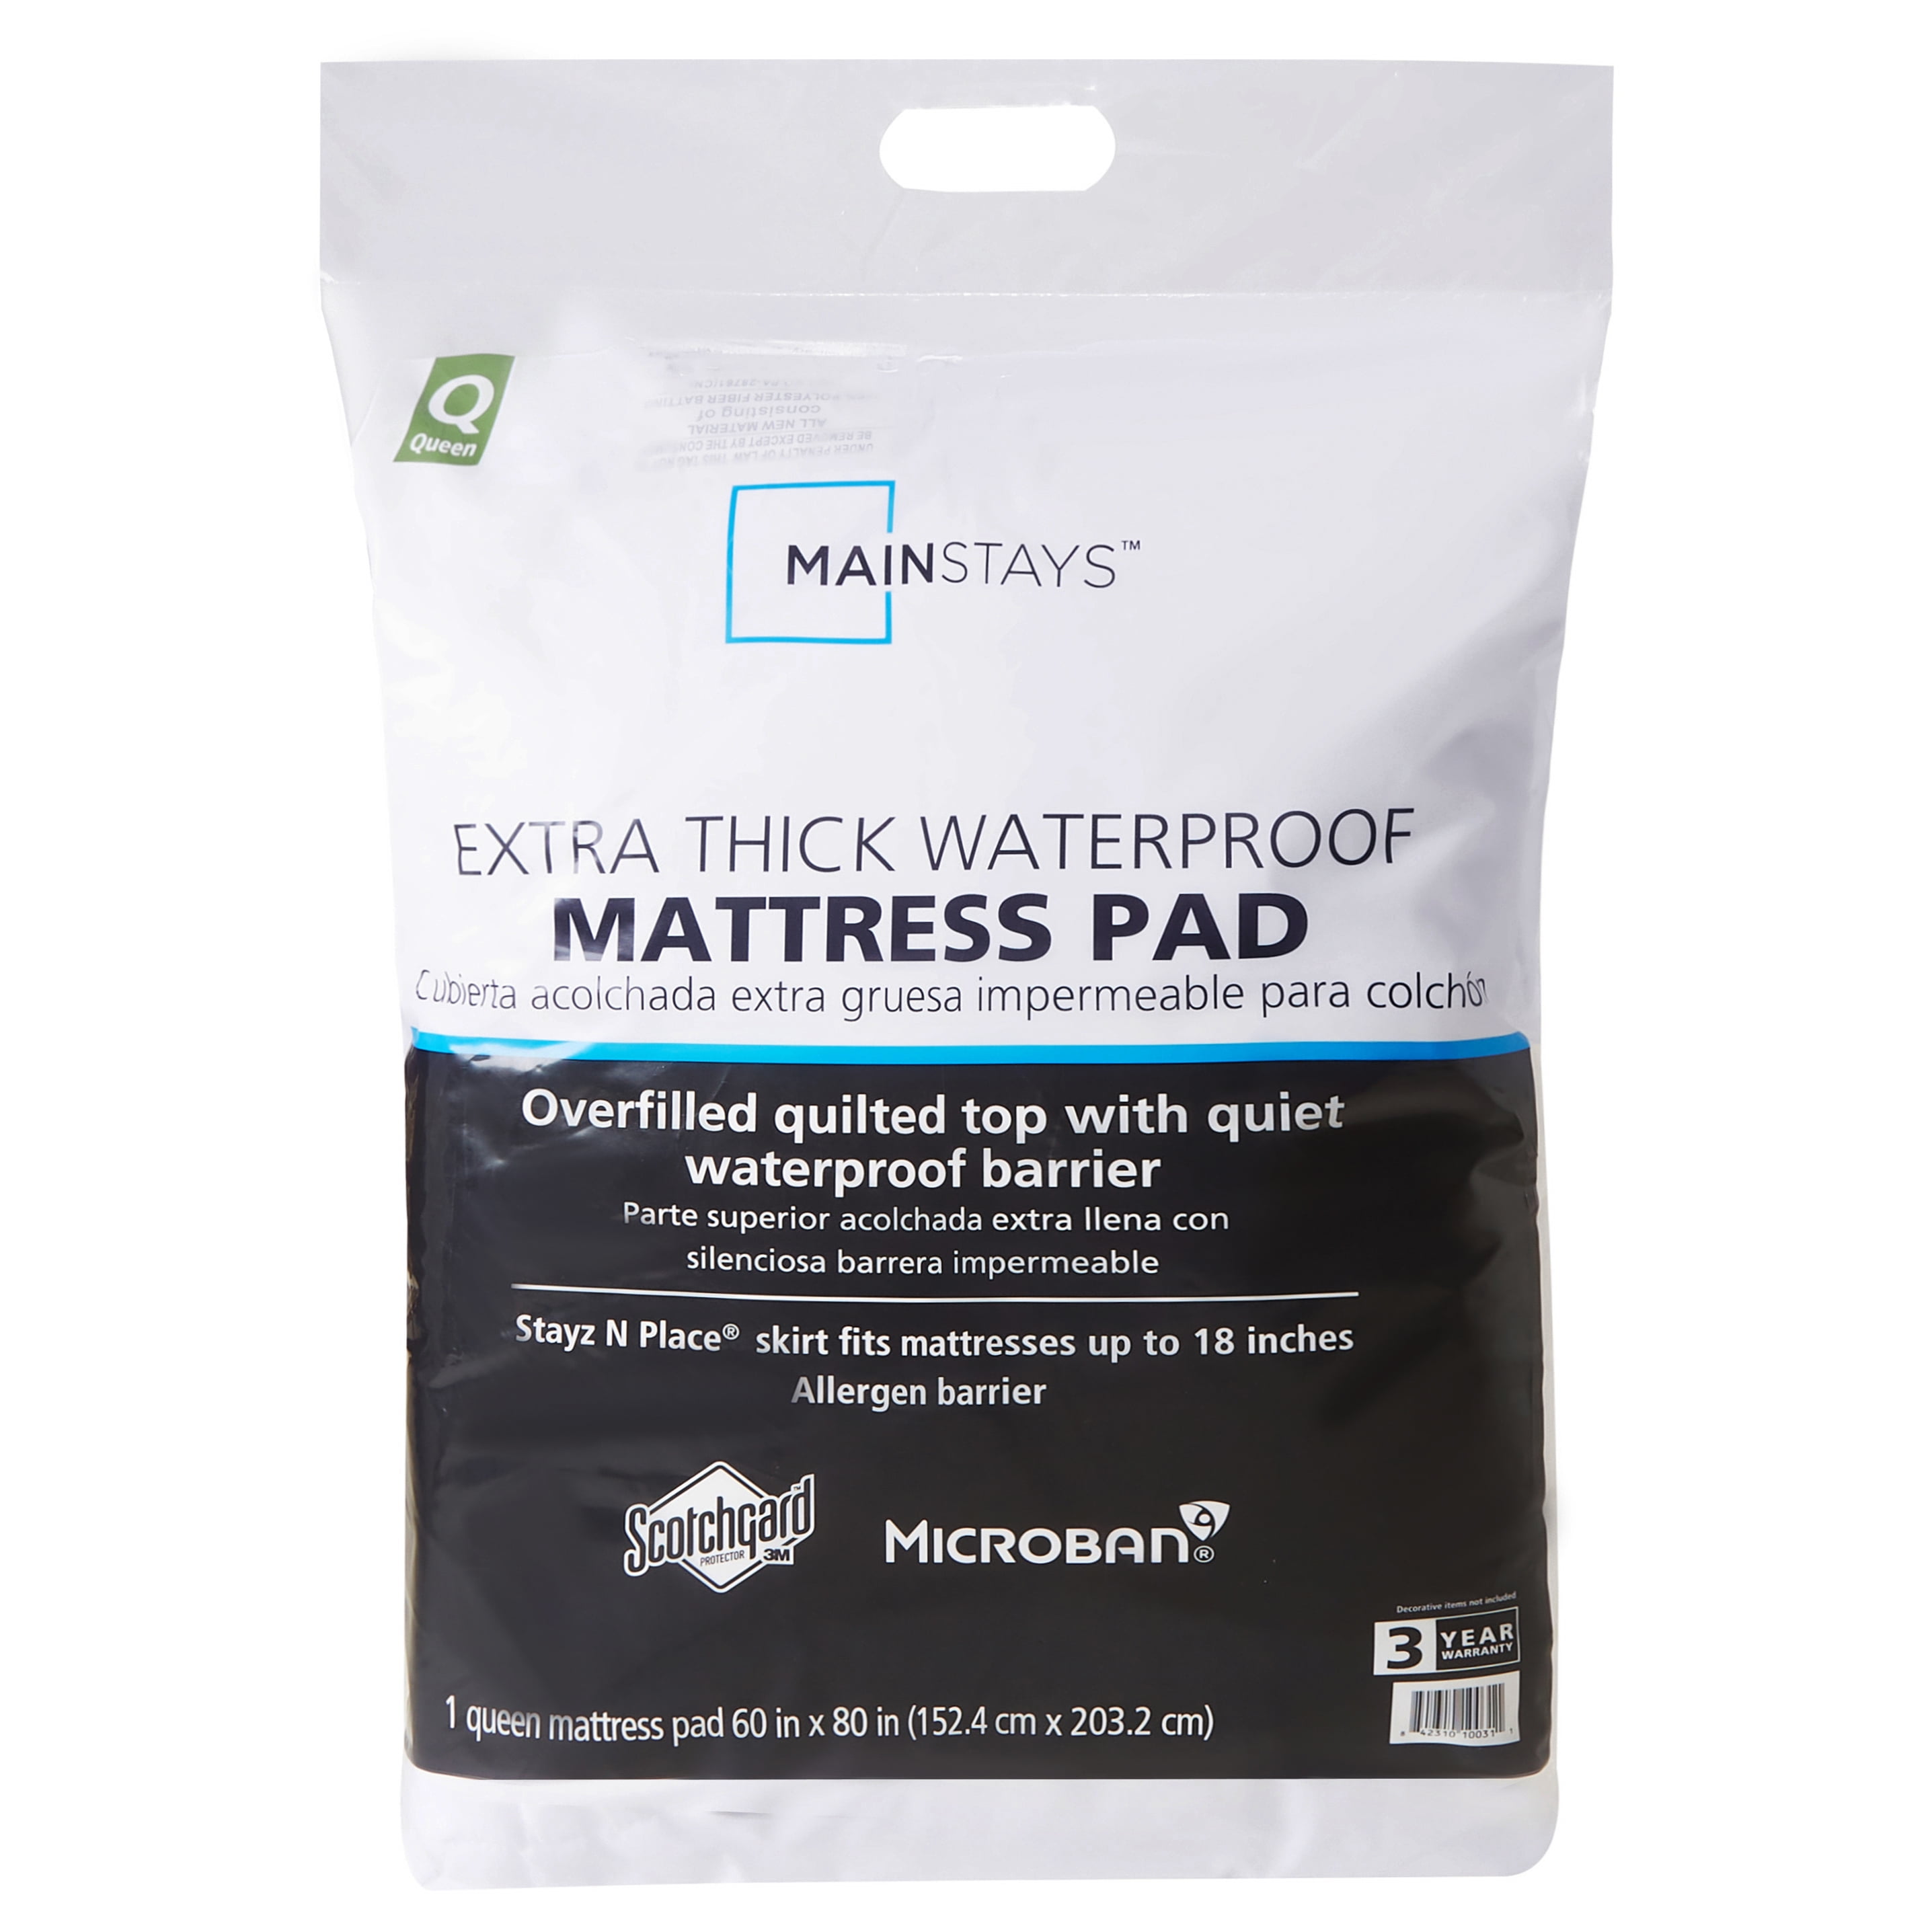 Details about   Mainstays Super Soft Mattress Pad Antimicrobial waterproof 2 Day Delivery 